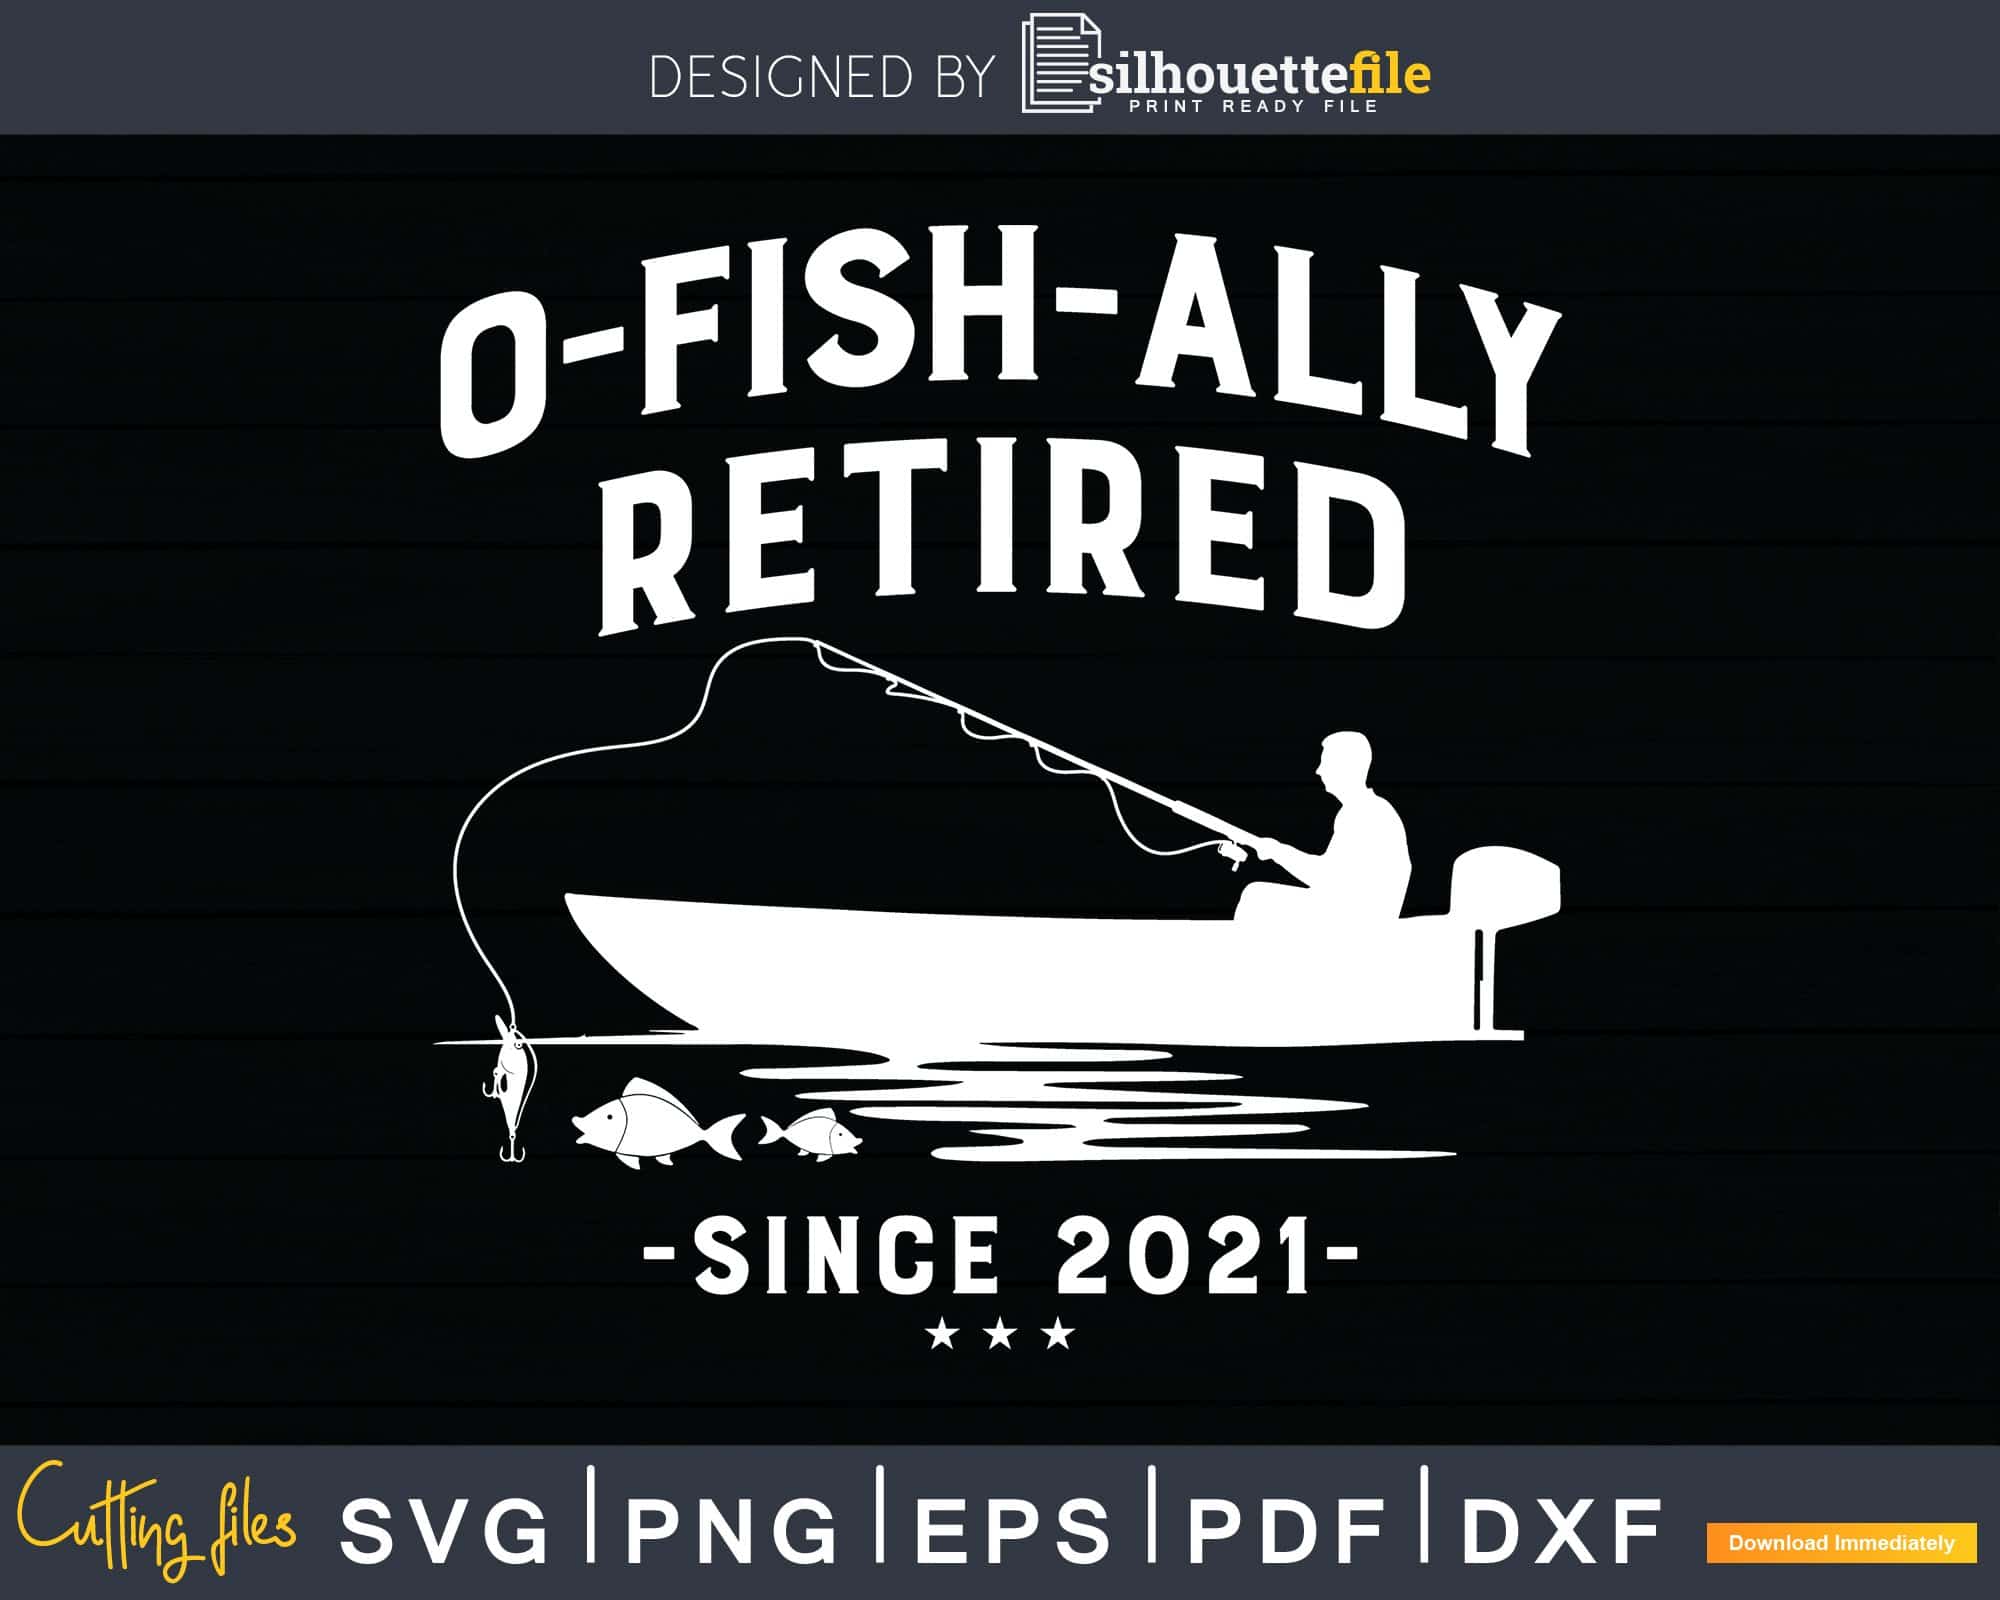 Fishing svg print-ready files available on